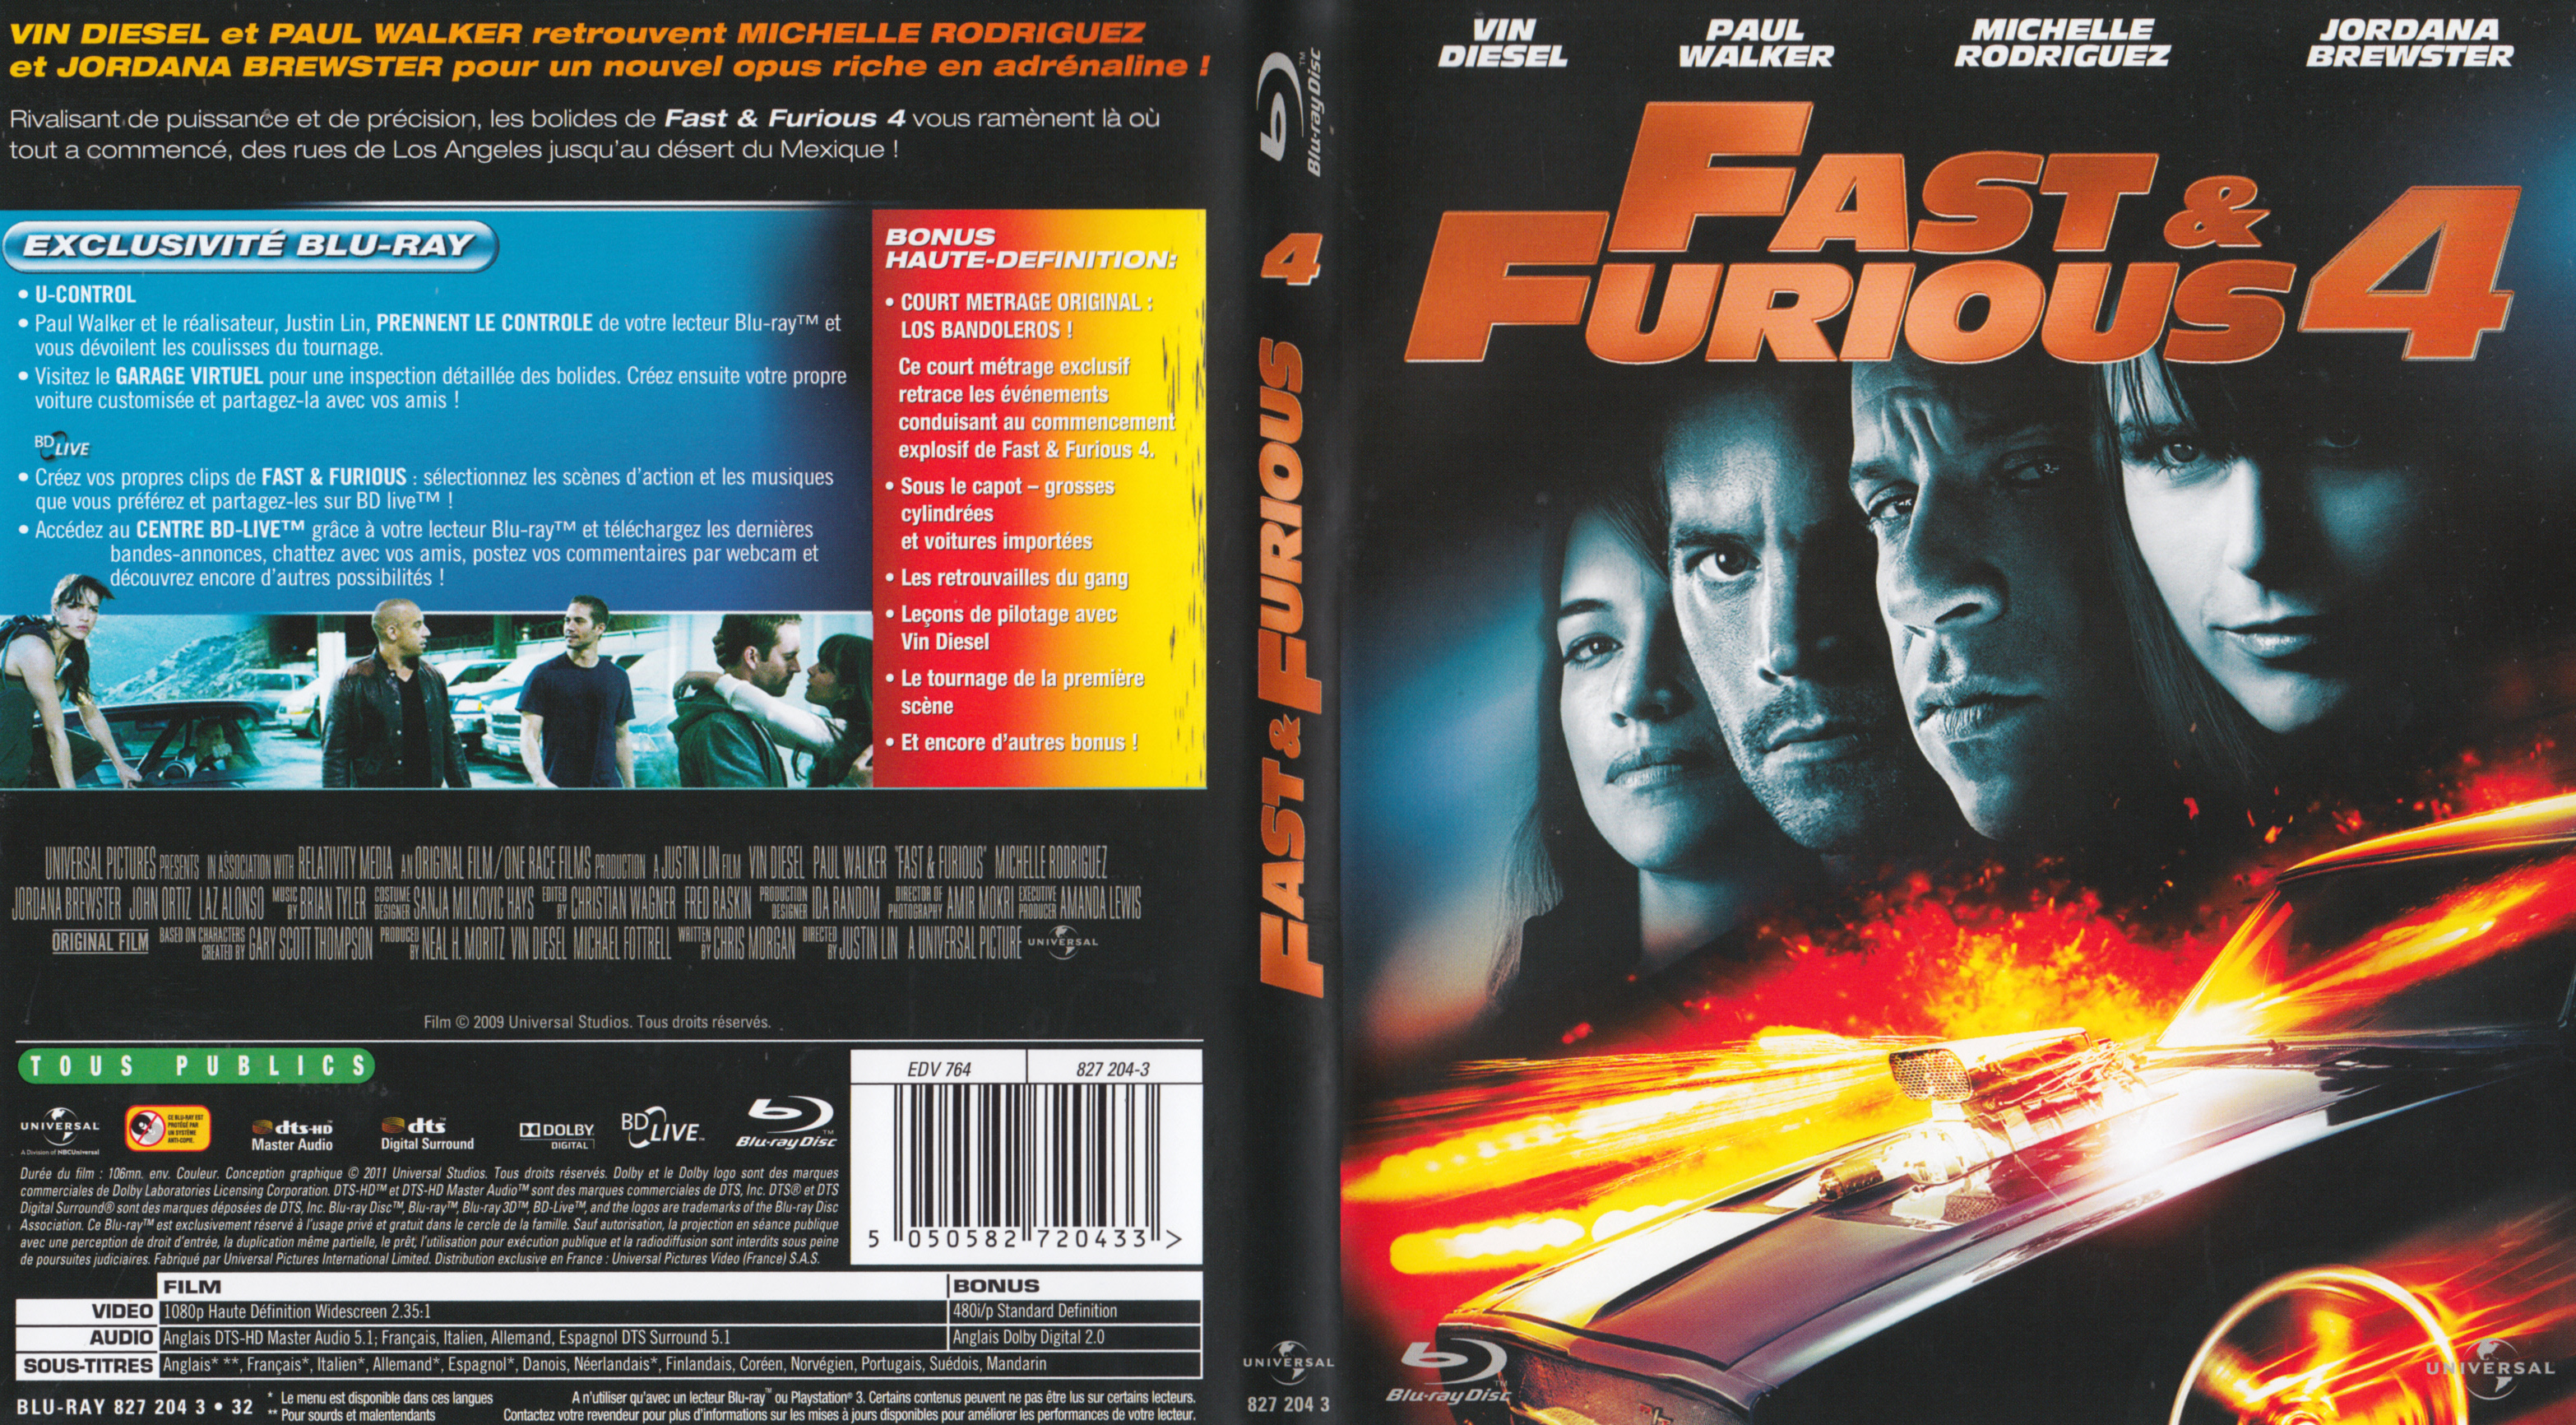 Jaquette DVD Fast and furious 4 (BLU-RAY) v2